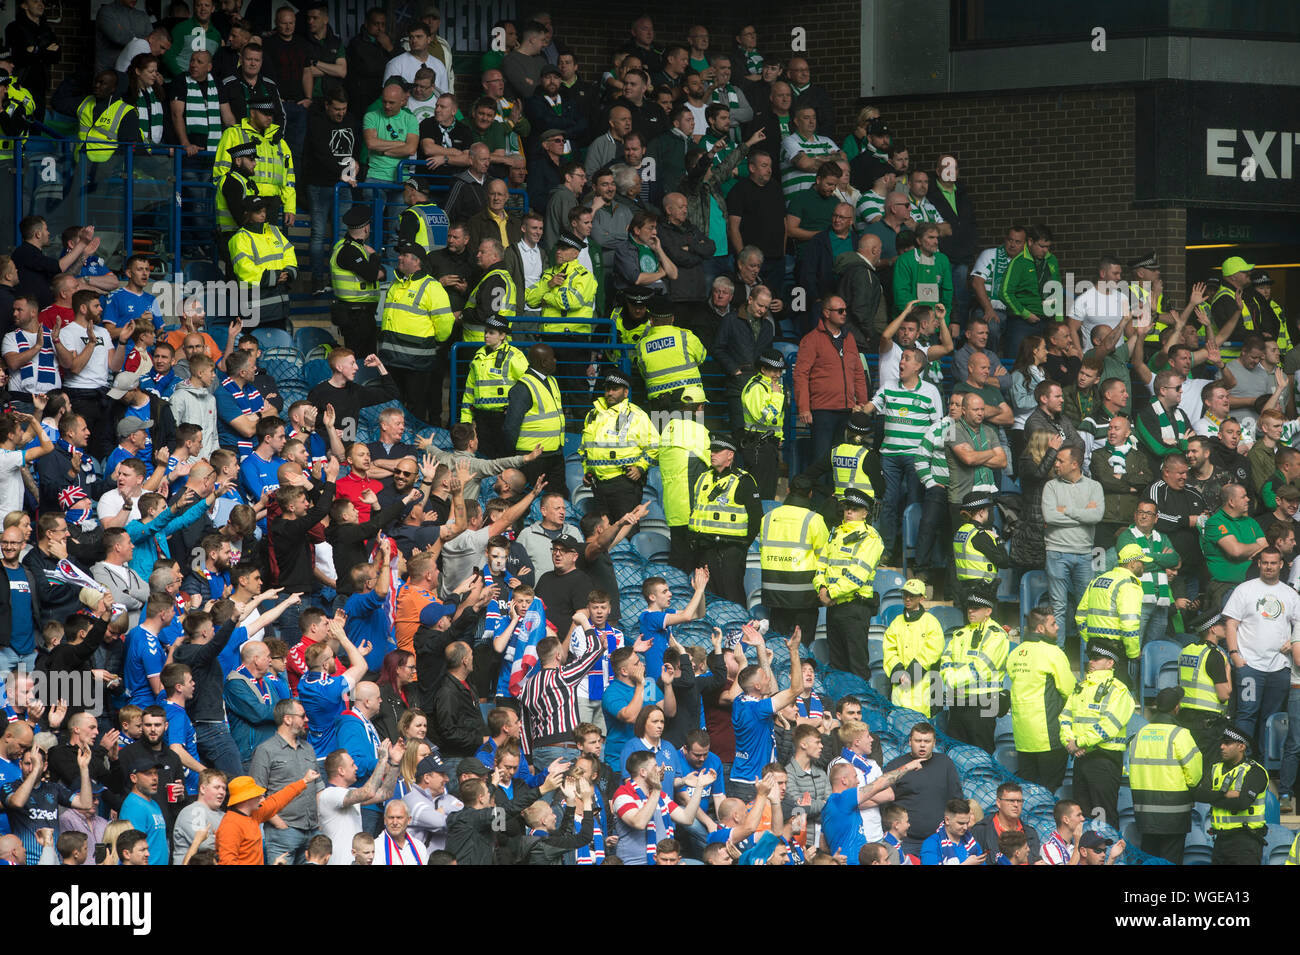 Rangers and Celtic fans segregated during the Ladbrokes Scottish Premiership match at Ibrox, Glasgow. Stock Photo